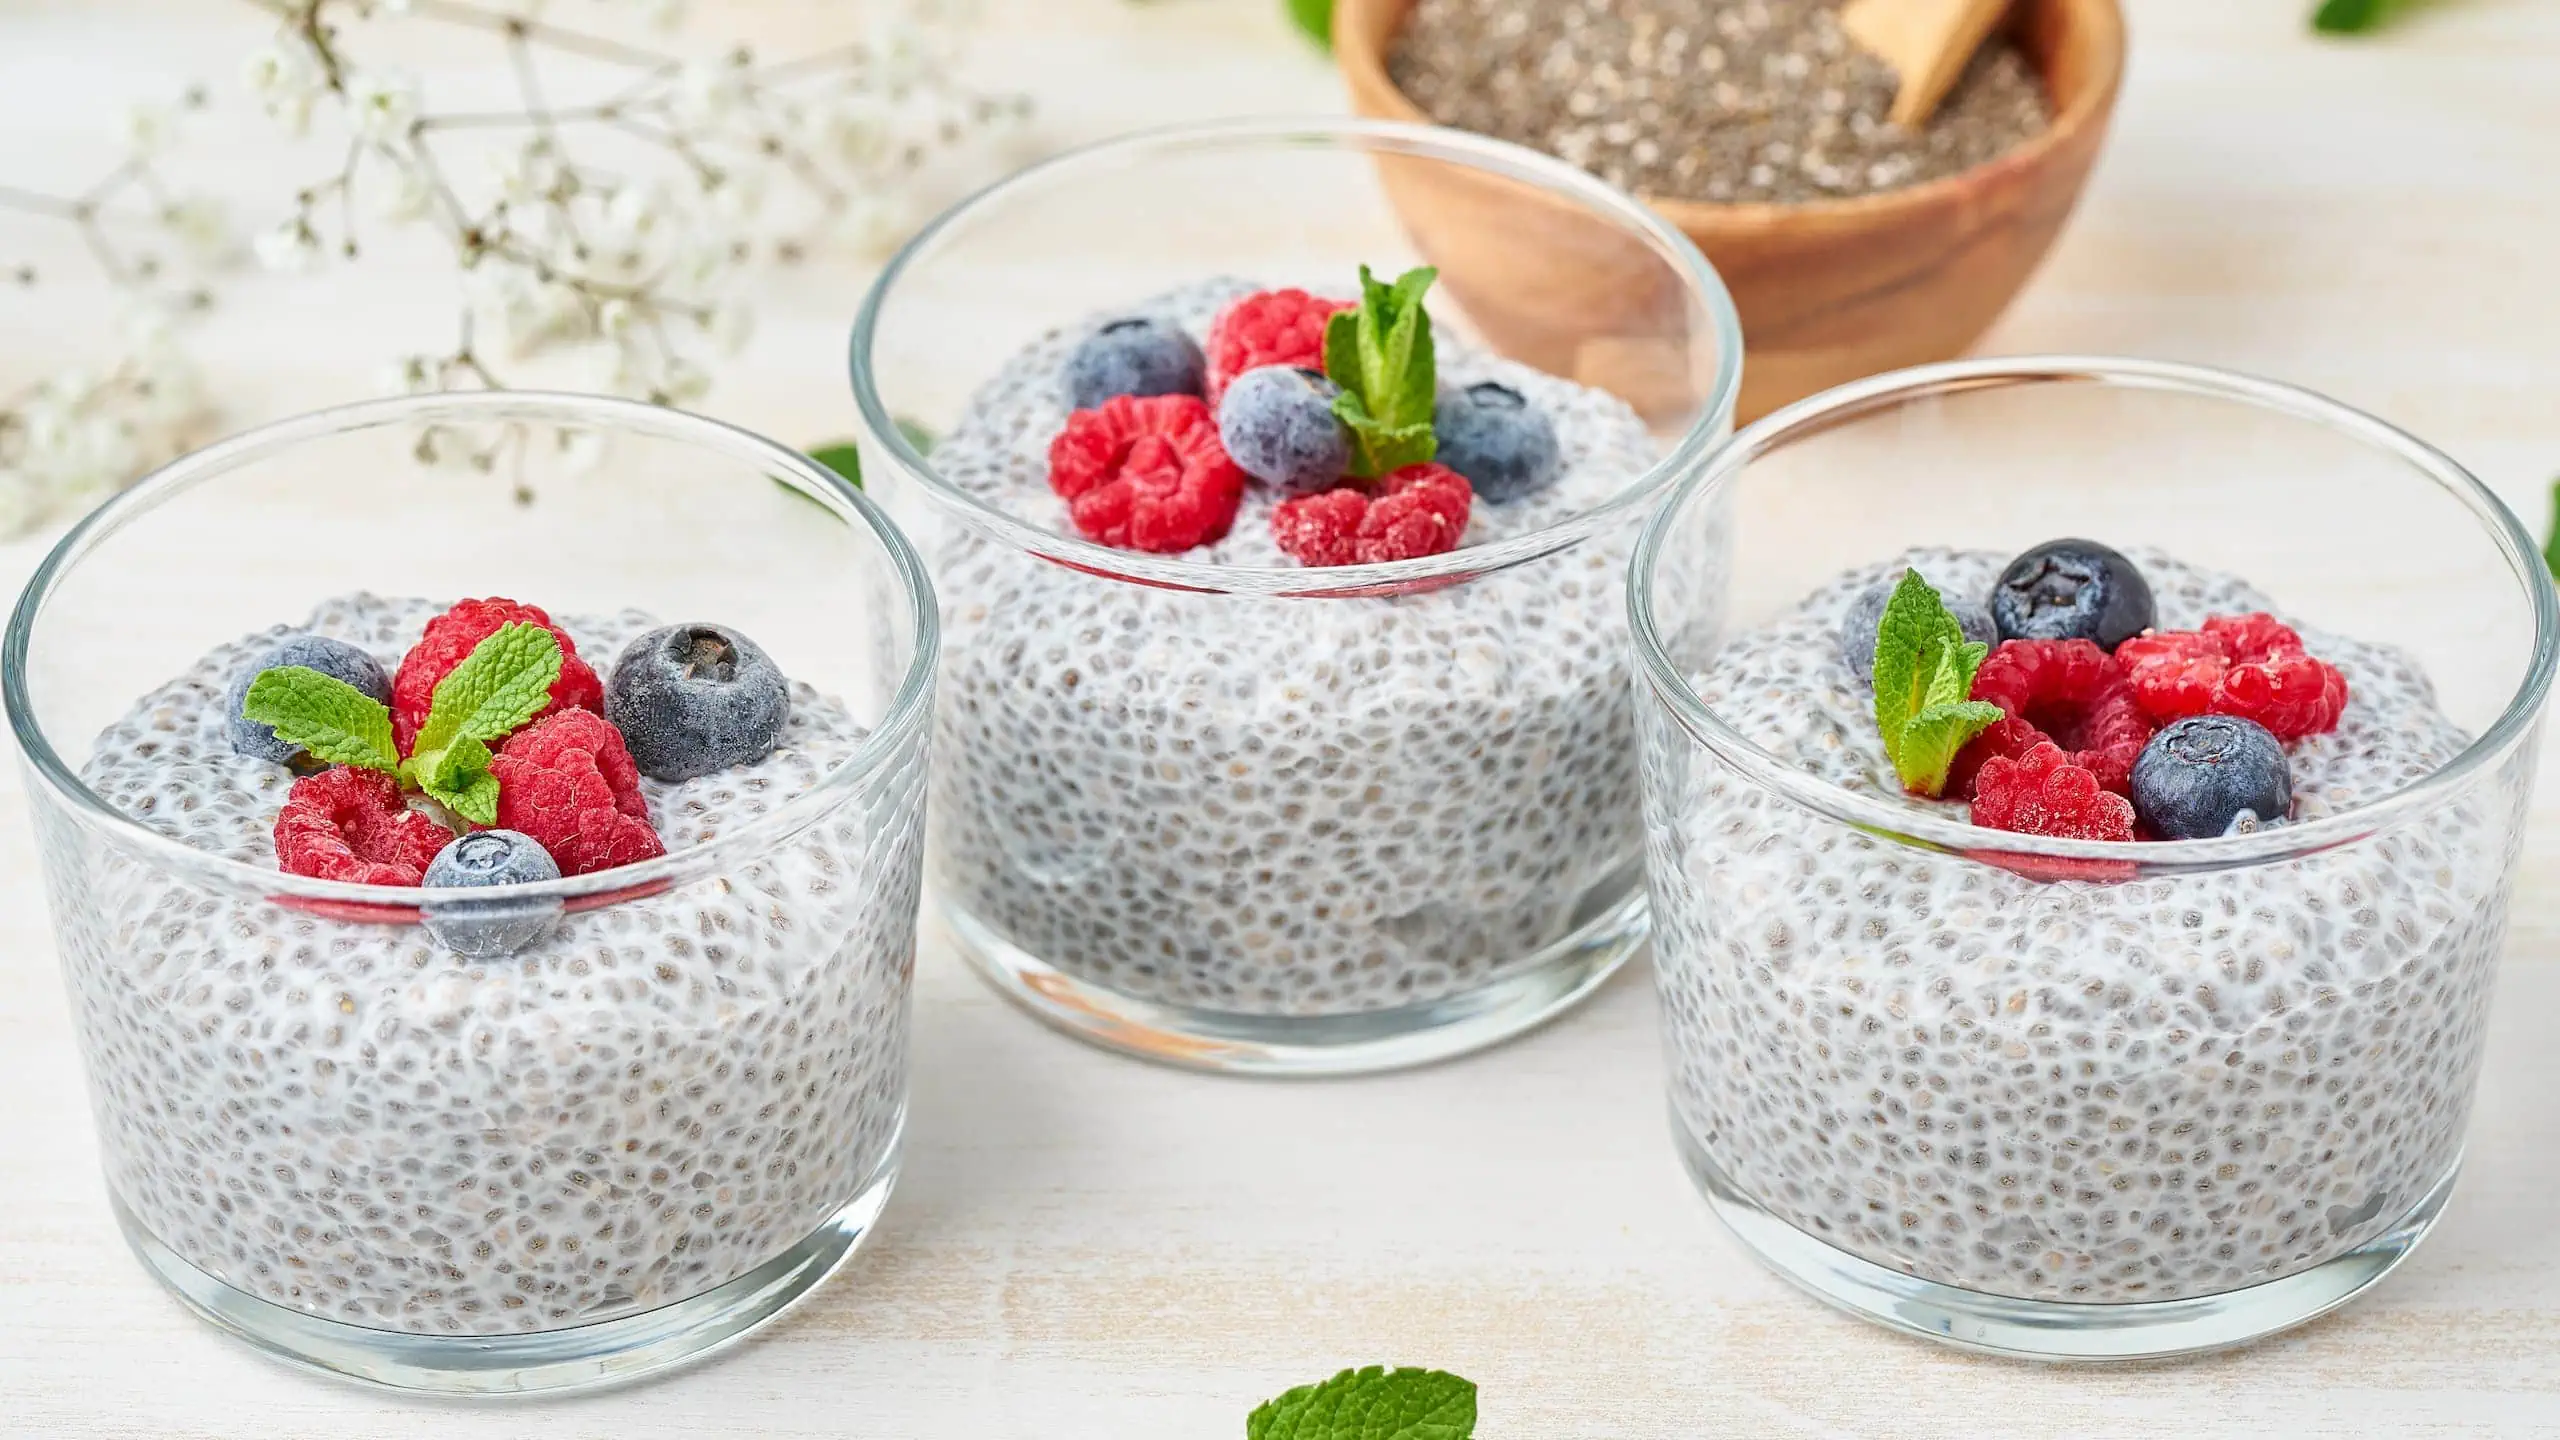 First Watch chia pudding with fresh berries, raspberries, and blueberries